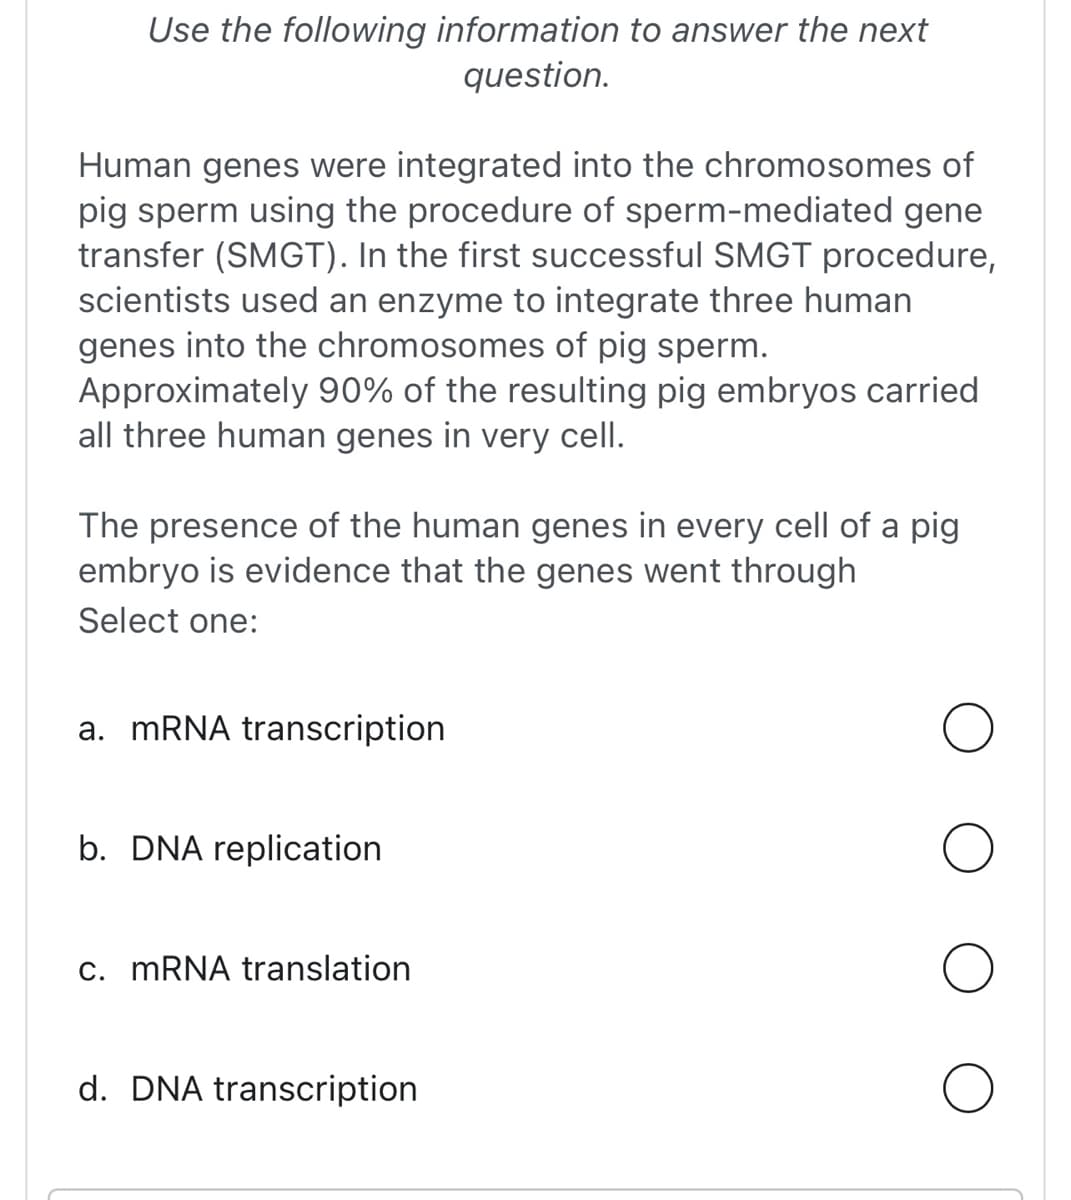 Use the following information to answer the next
question.
Human genes were integrated into the chromosomes of
pig sperm using the procedure of sperm-mediated gene
transfer (SMGT). In the first successful SMGT procedure,
scientists used an enzyme to integrate three human
genes into the chromosomes of pig sperm.
Approximately 90% of the resulting pig embryos carried
all three human genes in very cell.
The presence of the human genes in every cell of a pig
embryo is evidence that the genes went through
Select one:
a. mRNA transcription
b. DNA replication
c. mRNA translation
d. DNA transcription